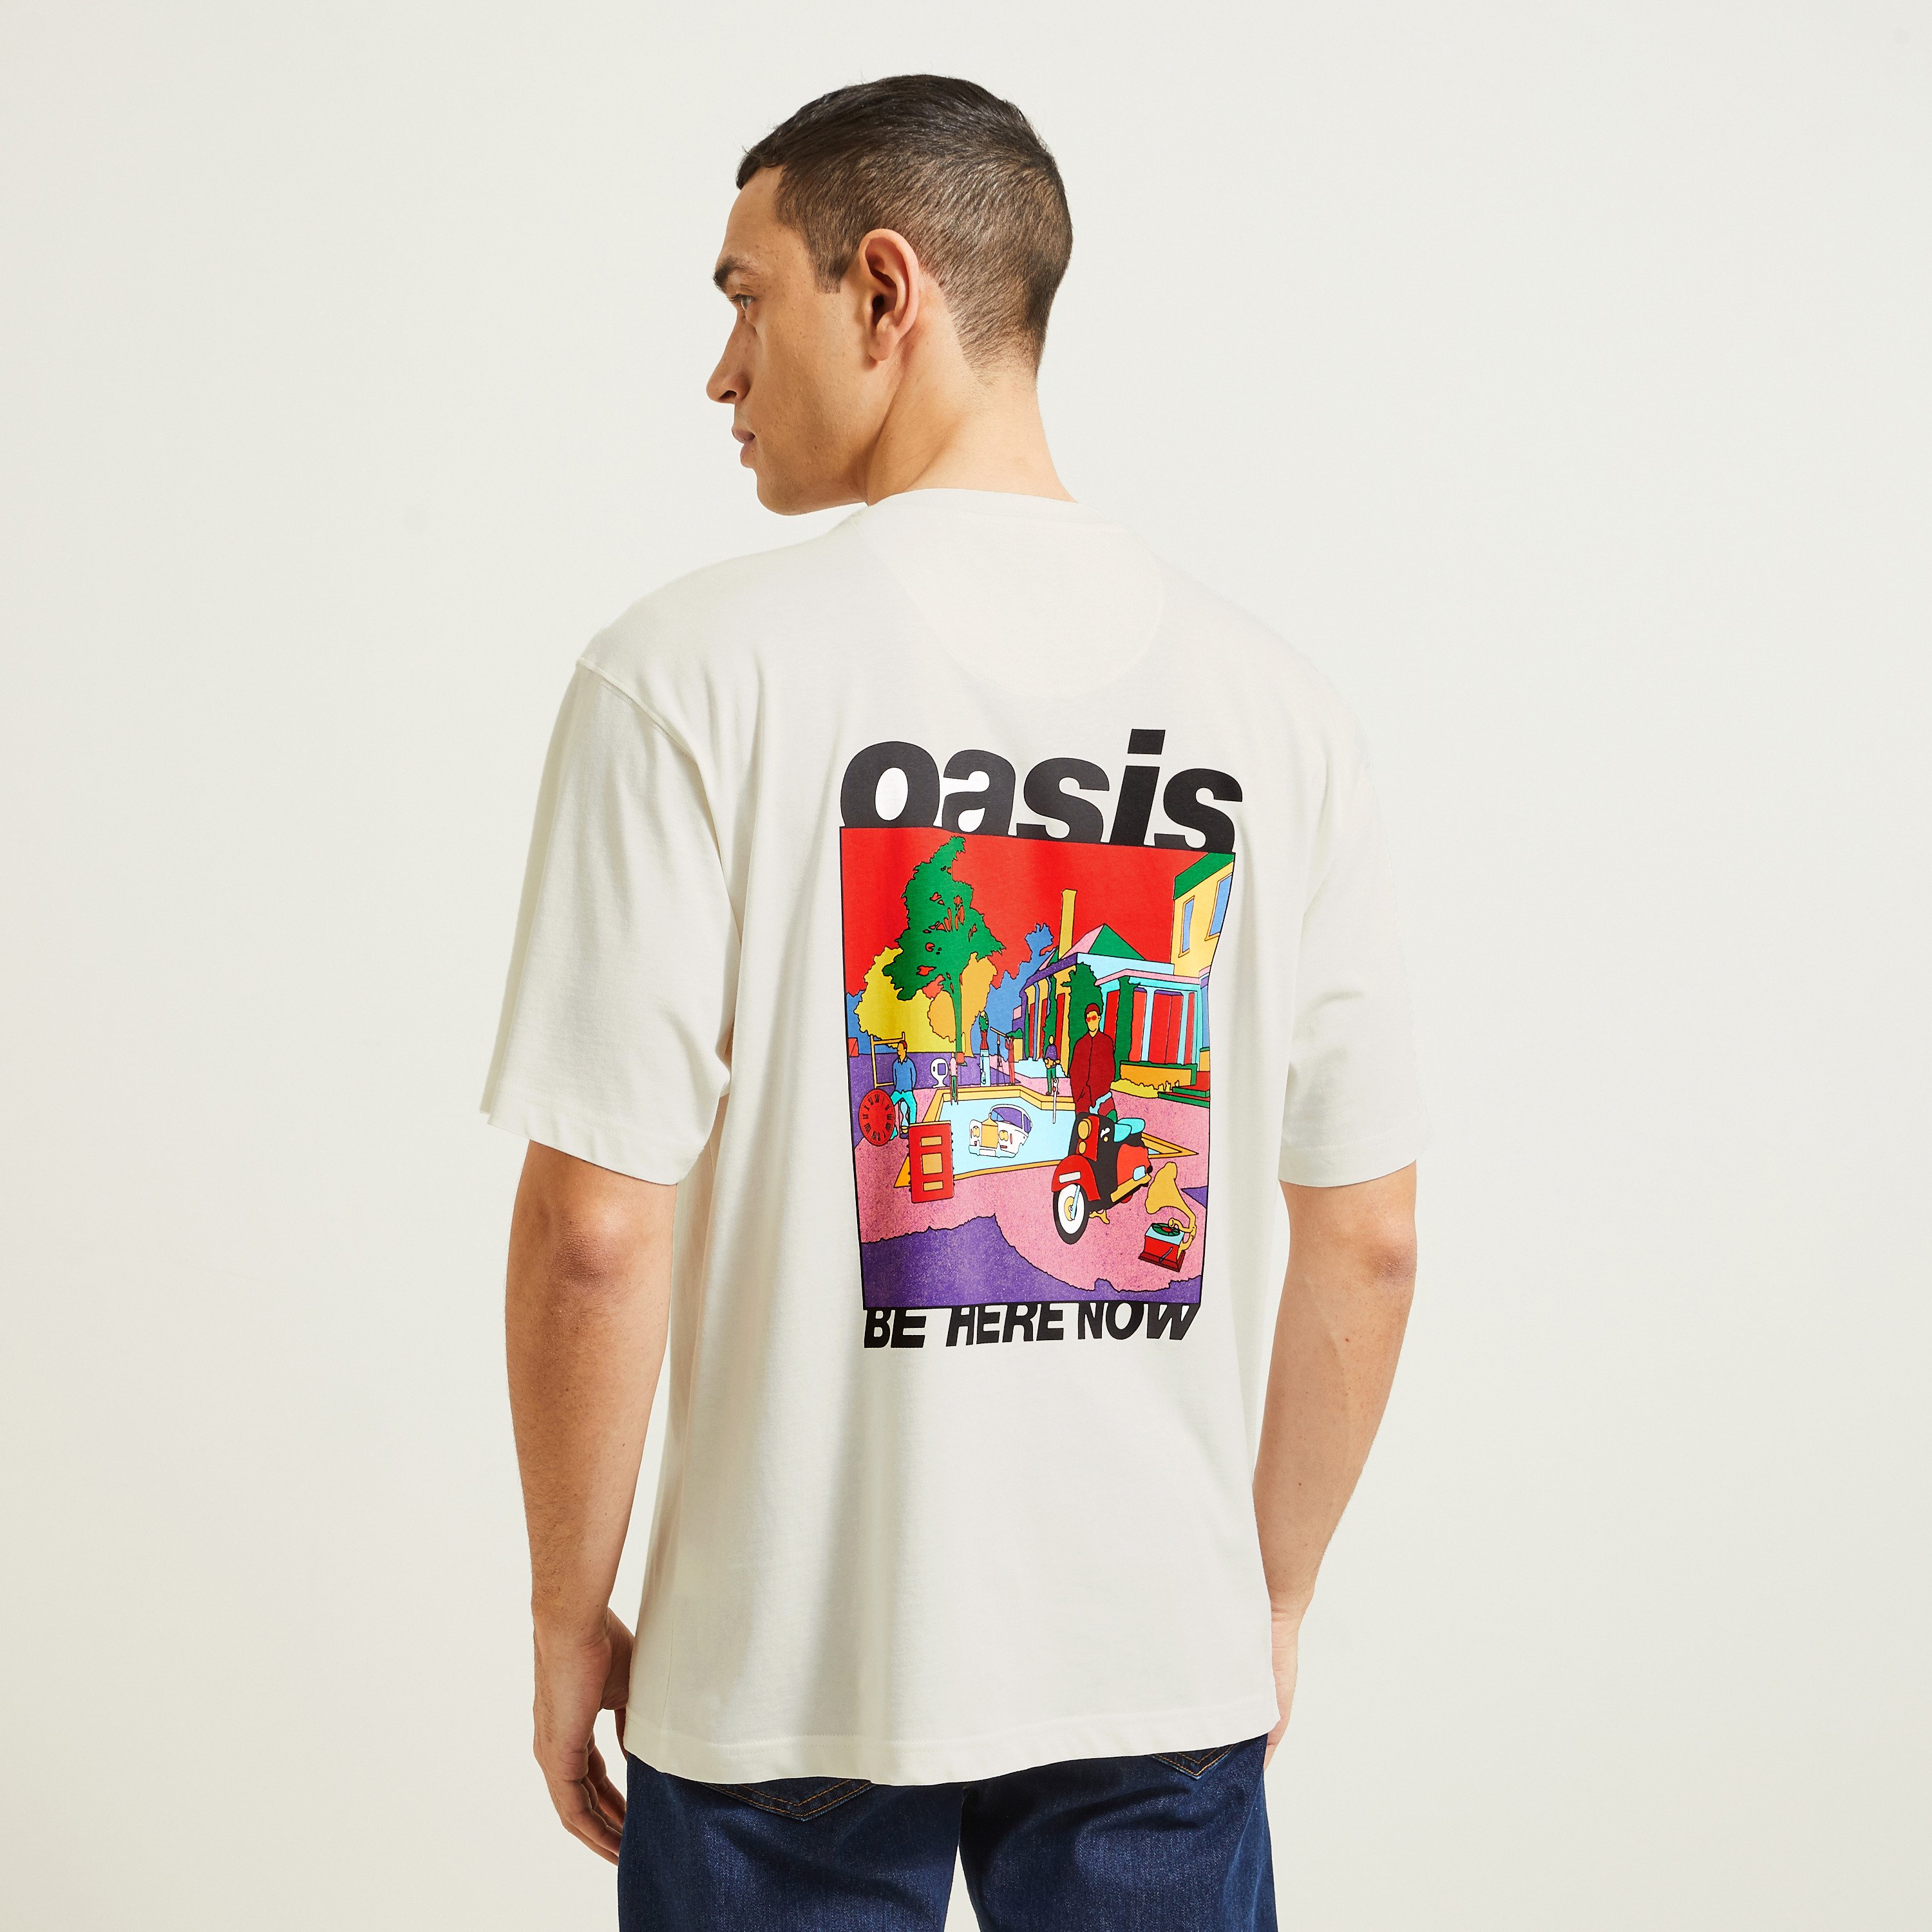 Tee-shirt licence Oasis Ecru S 100% Coton Homme